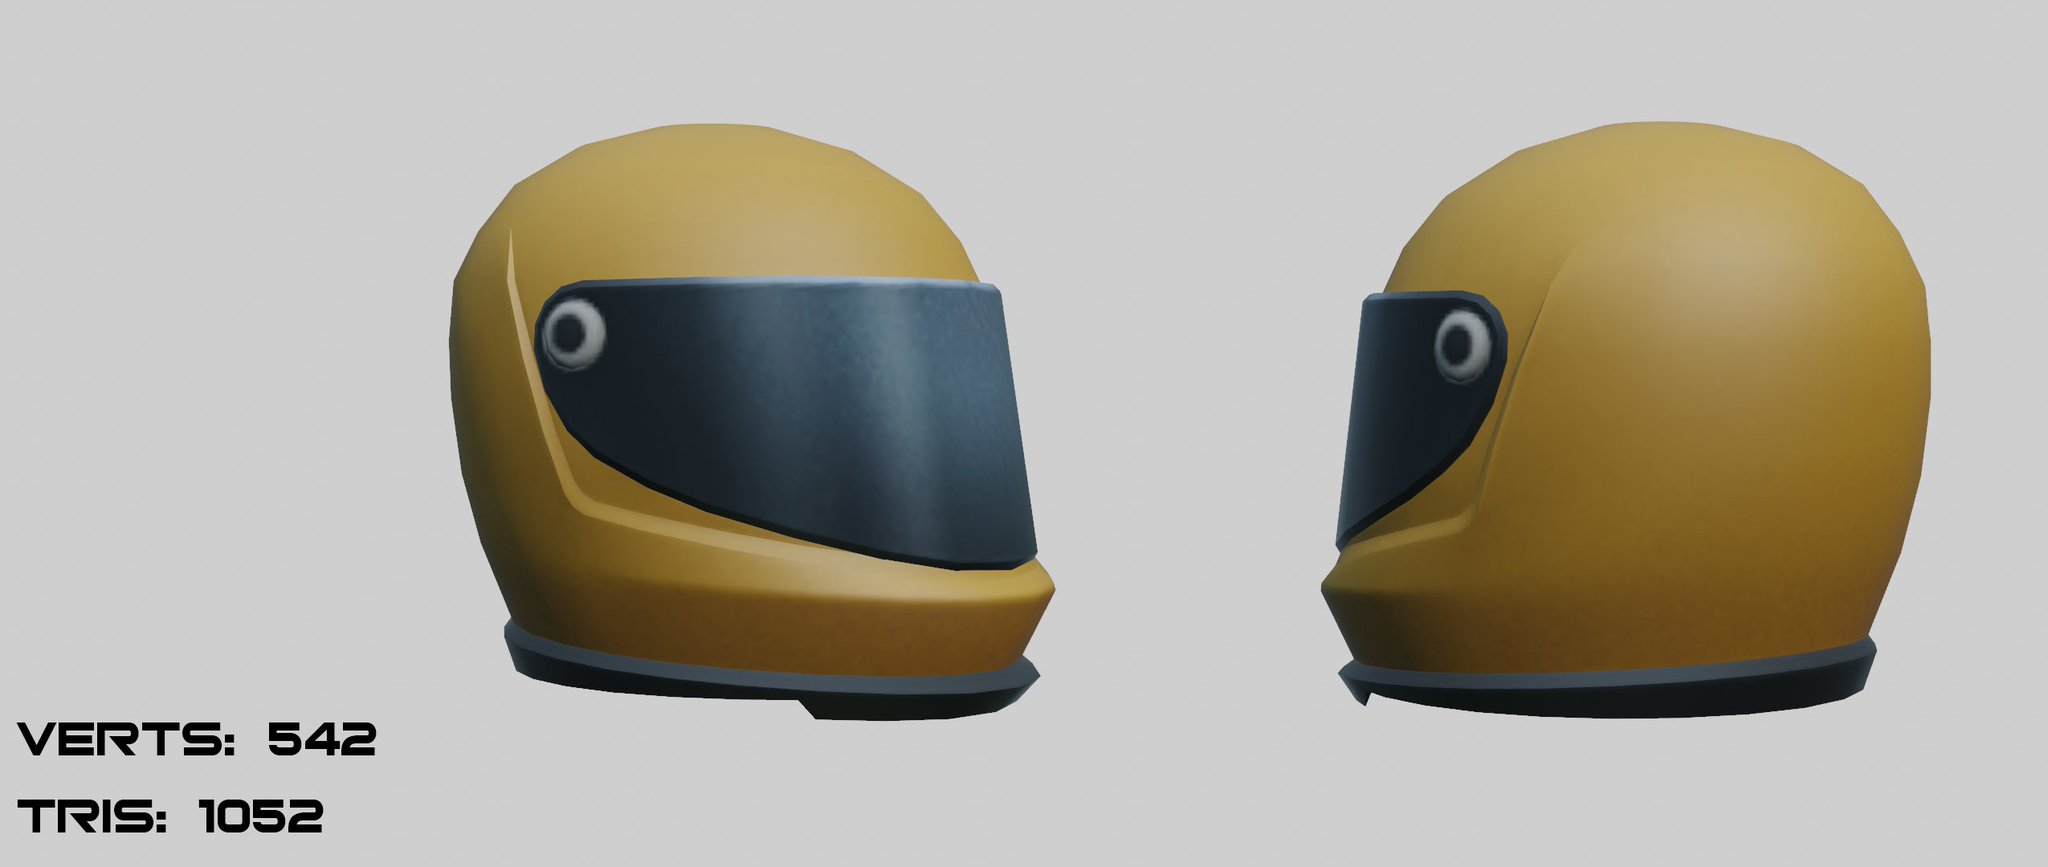 Pacenotes On Twitter Ugc Concept 90s Gp Helmet A Helmet Worn By Open Wheel Racers From Decades Past A Time Before Hybrid Engines And Strict Safety Regulations This Particular Example Comes In A - biker hotline miami roblox